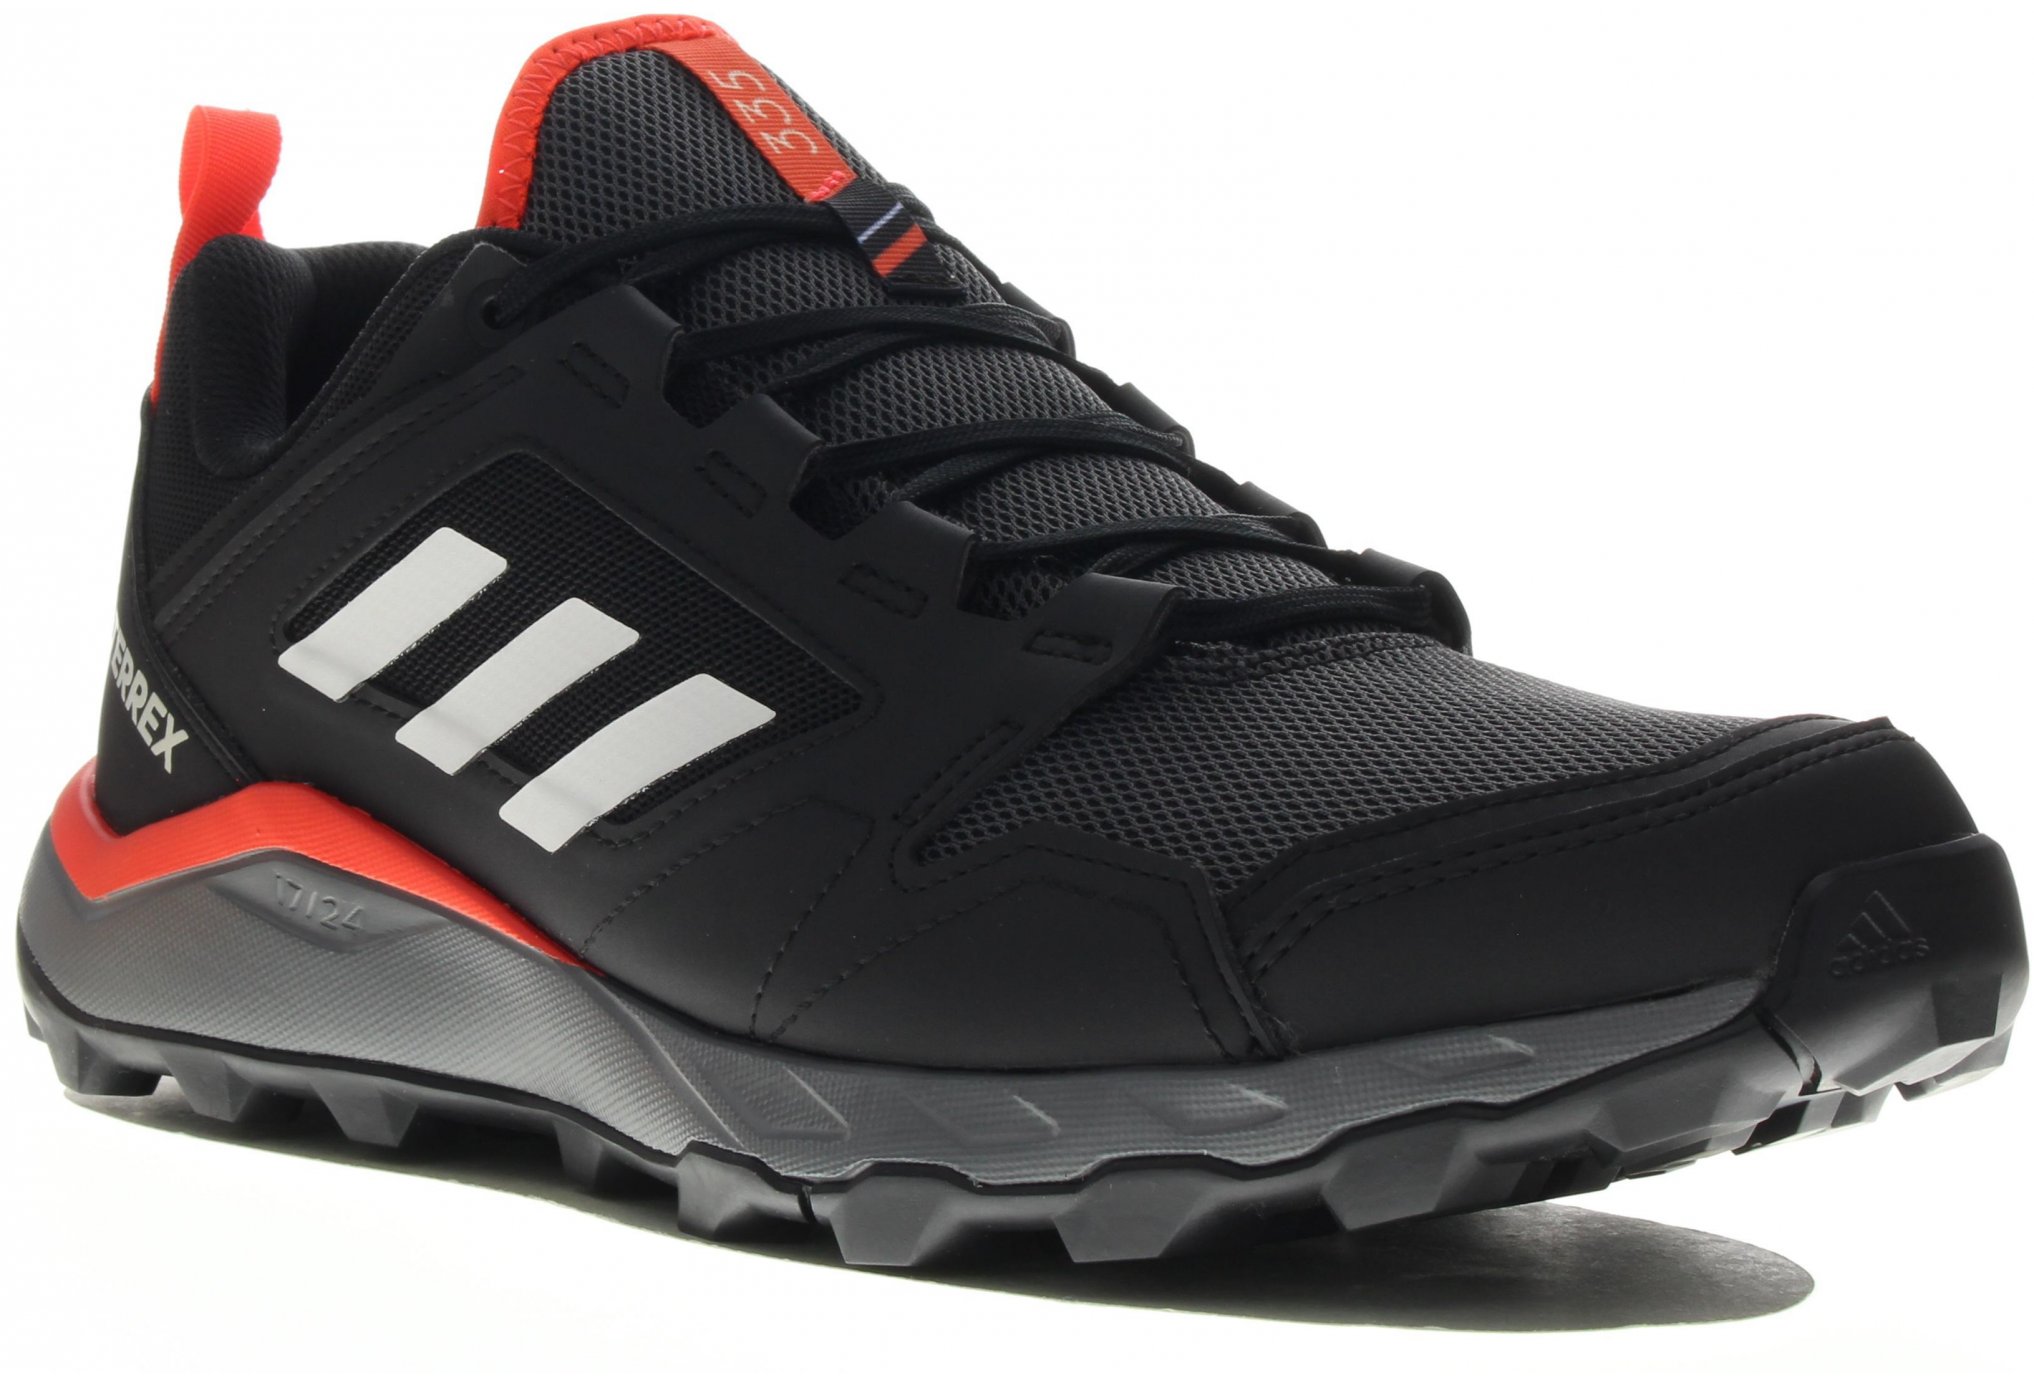 Adidas Terrex agravic tr m chaussures homme